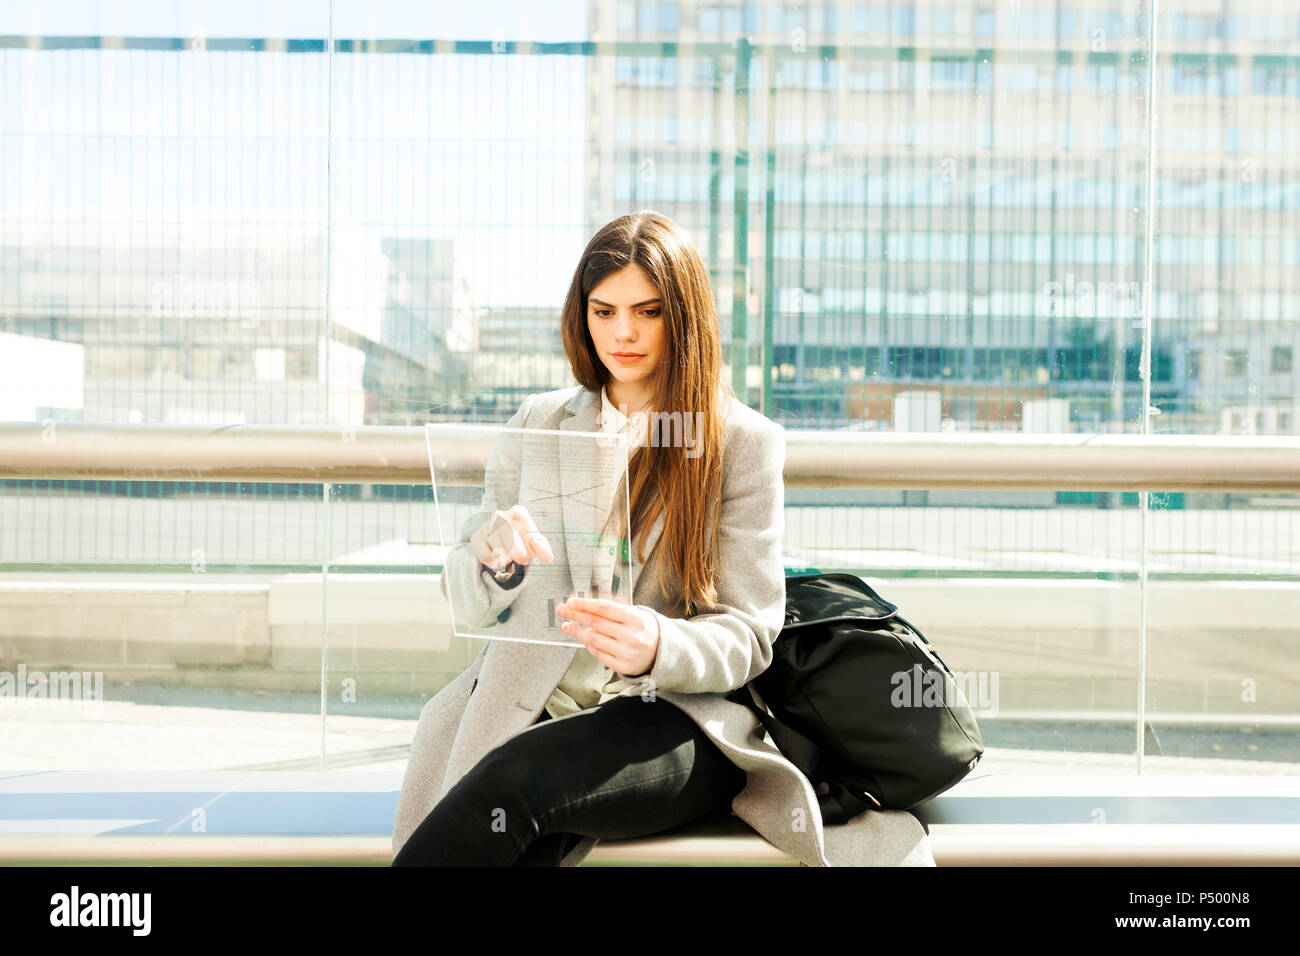 Spain, Barcelona, portrait of young businesswoman using futuristic portable device at station Stock Photo